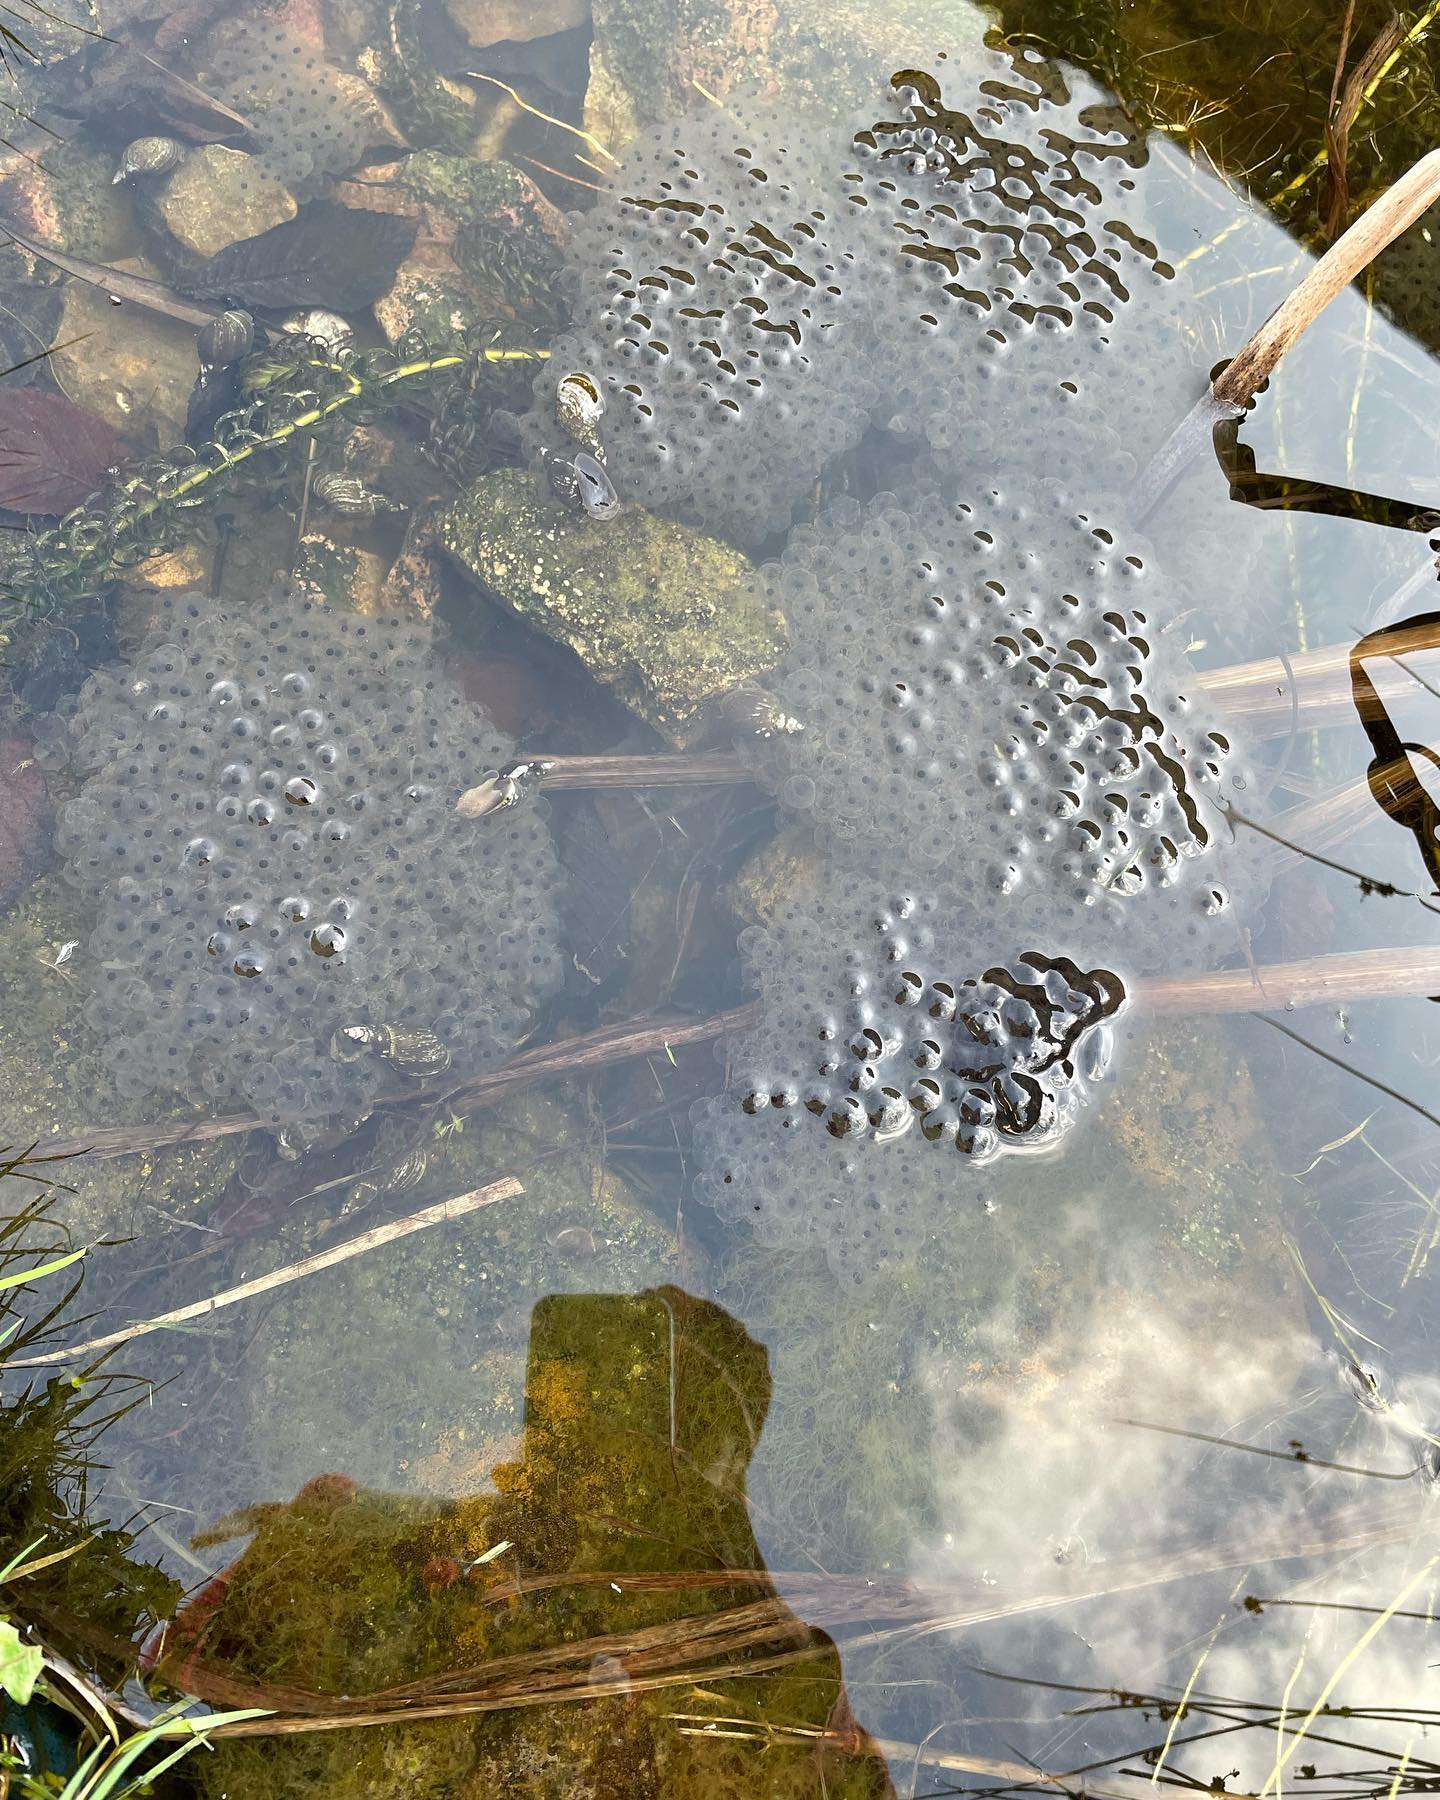 So happy to see this appear at the weekend in our pond #frogspawn #pond #oakham #rutland #holidaycottage #happy